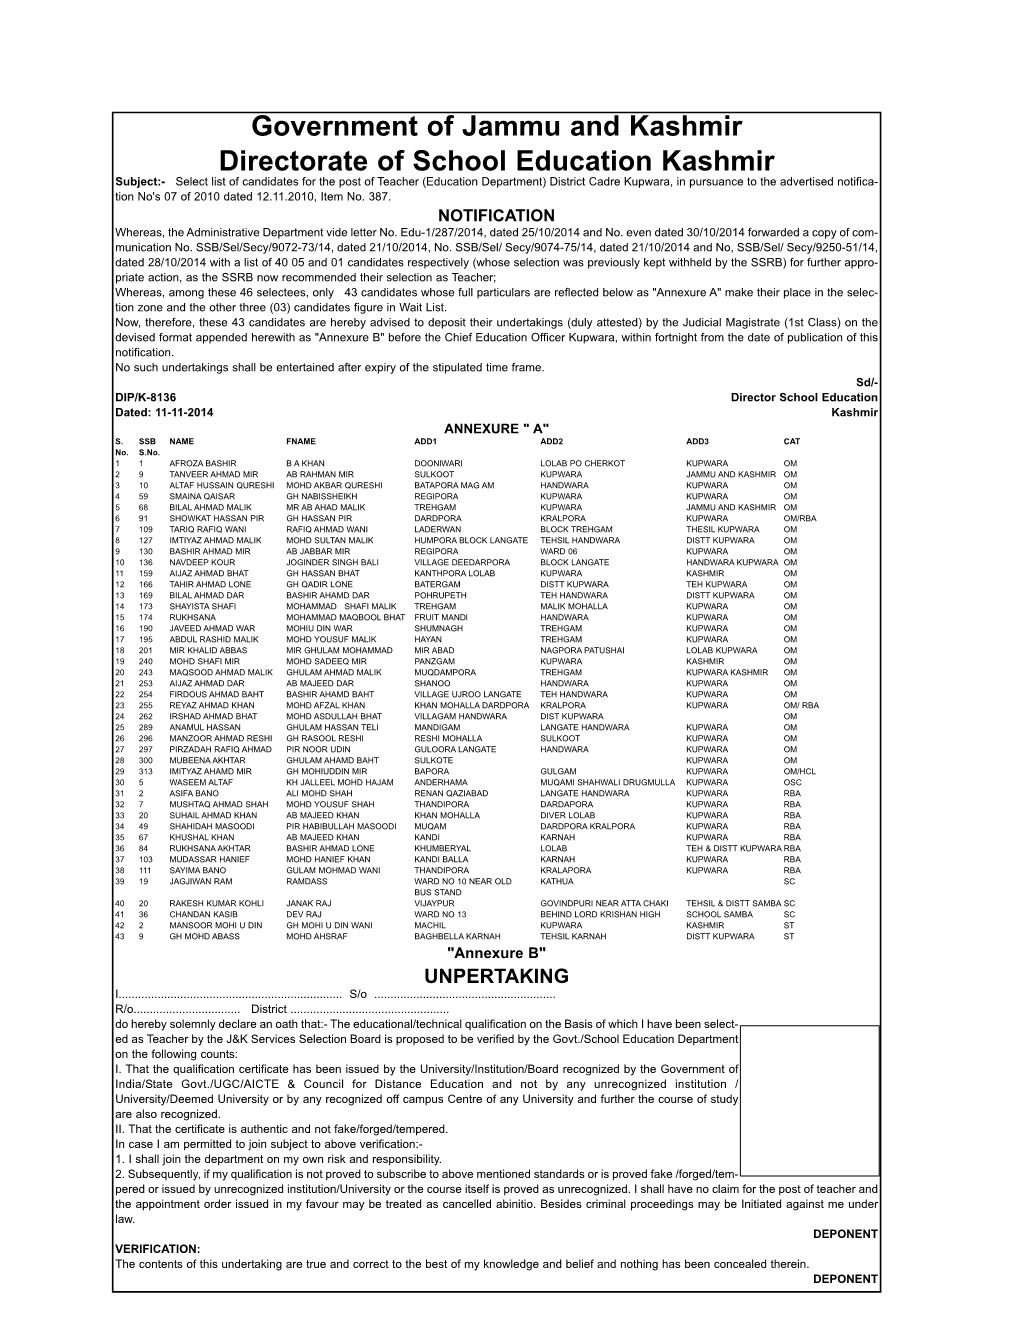 Government of Jammu and Kashmir Directorate of School Education